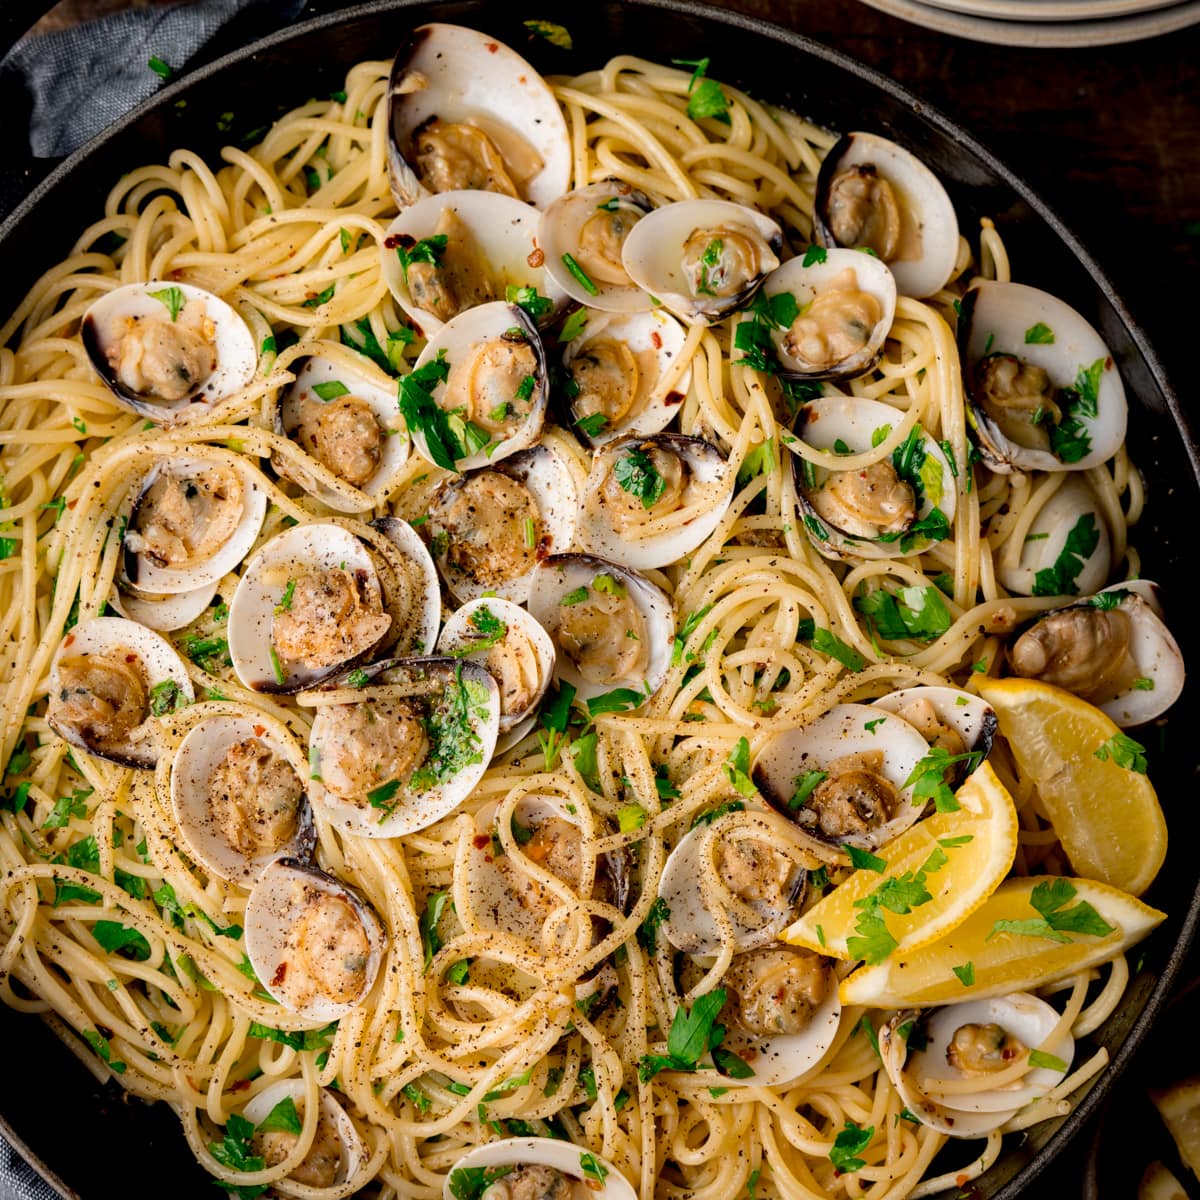 Overhead square image of Spaghetti Vongole (spaghetti with clams) in a black pan topped with parsley and lemon wedges.